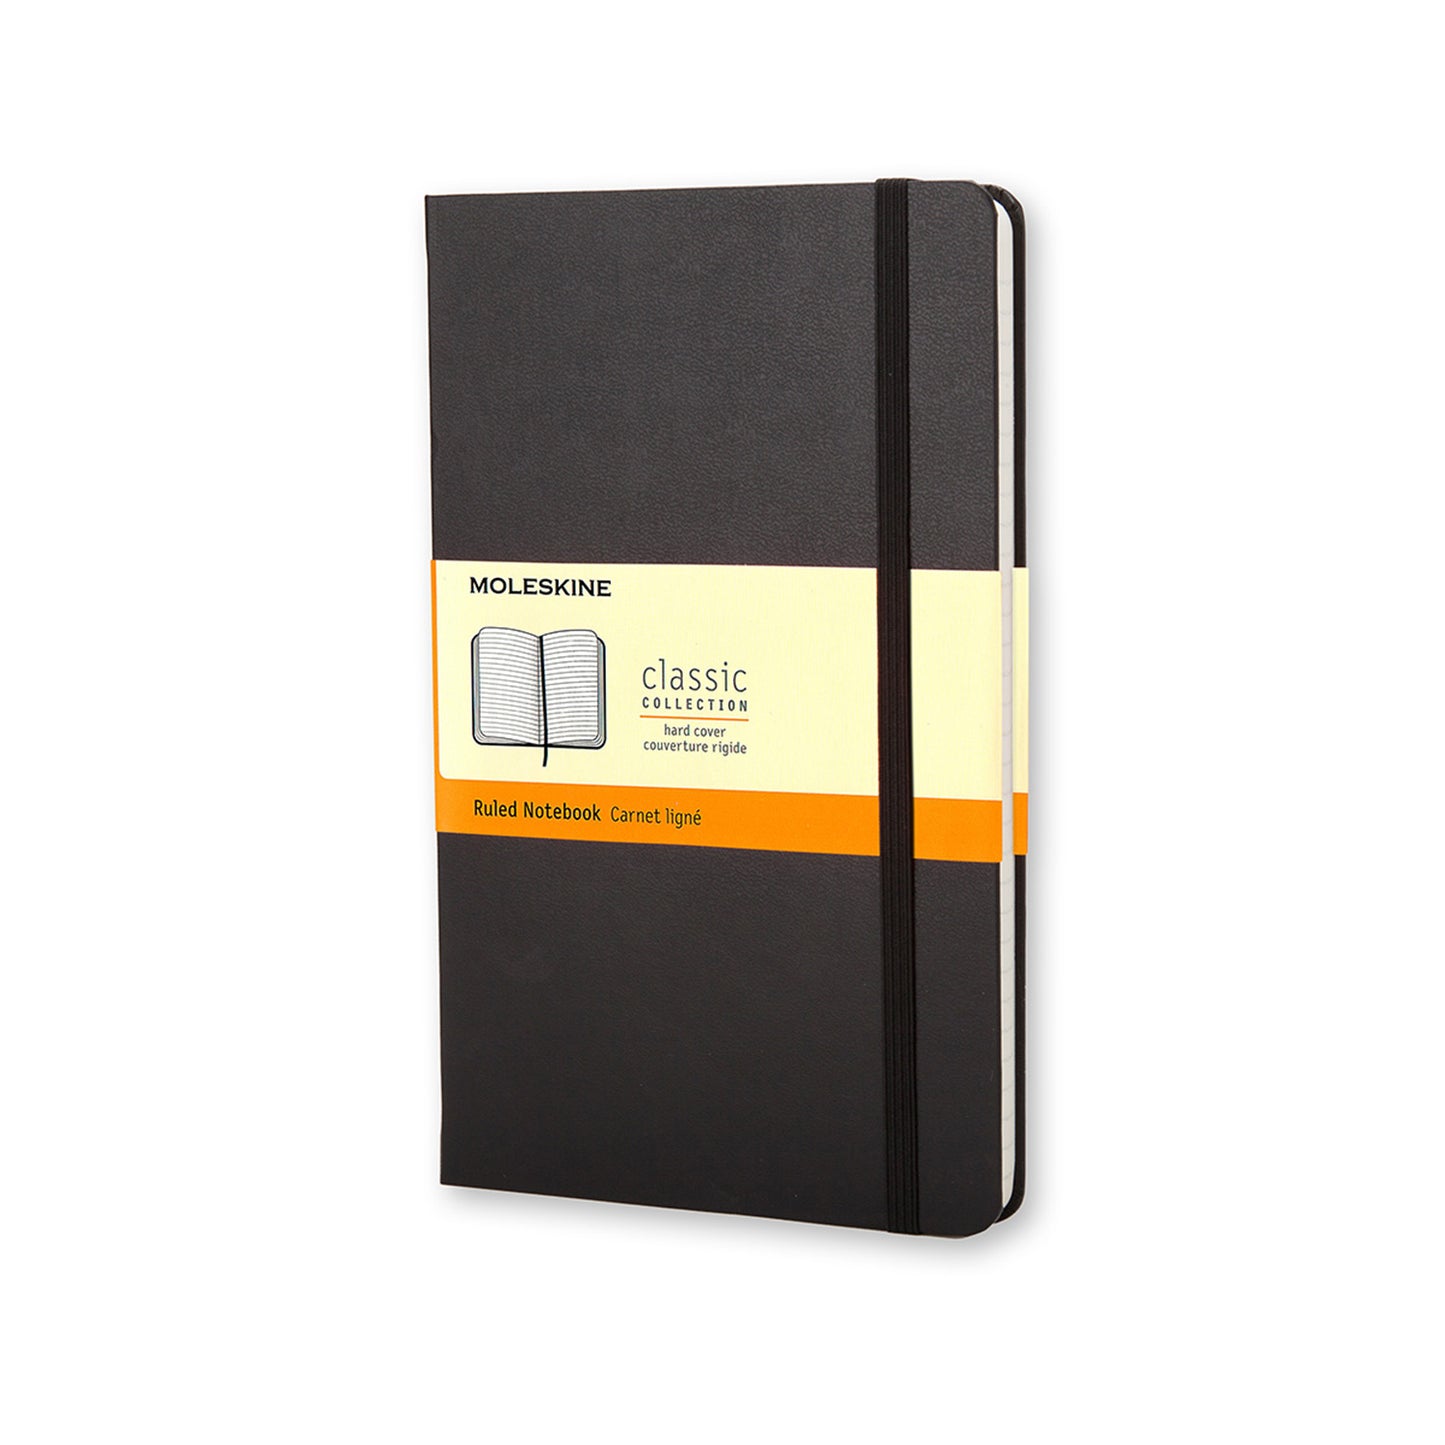 Classic Large Ruled Notebook Hard Cover - Black